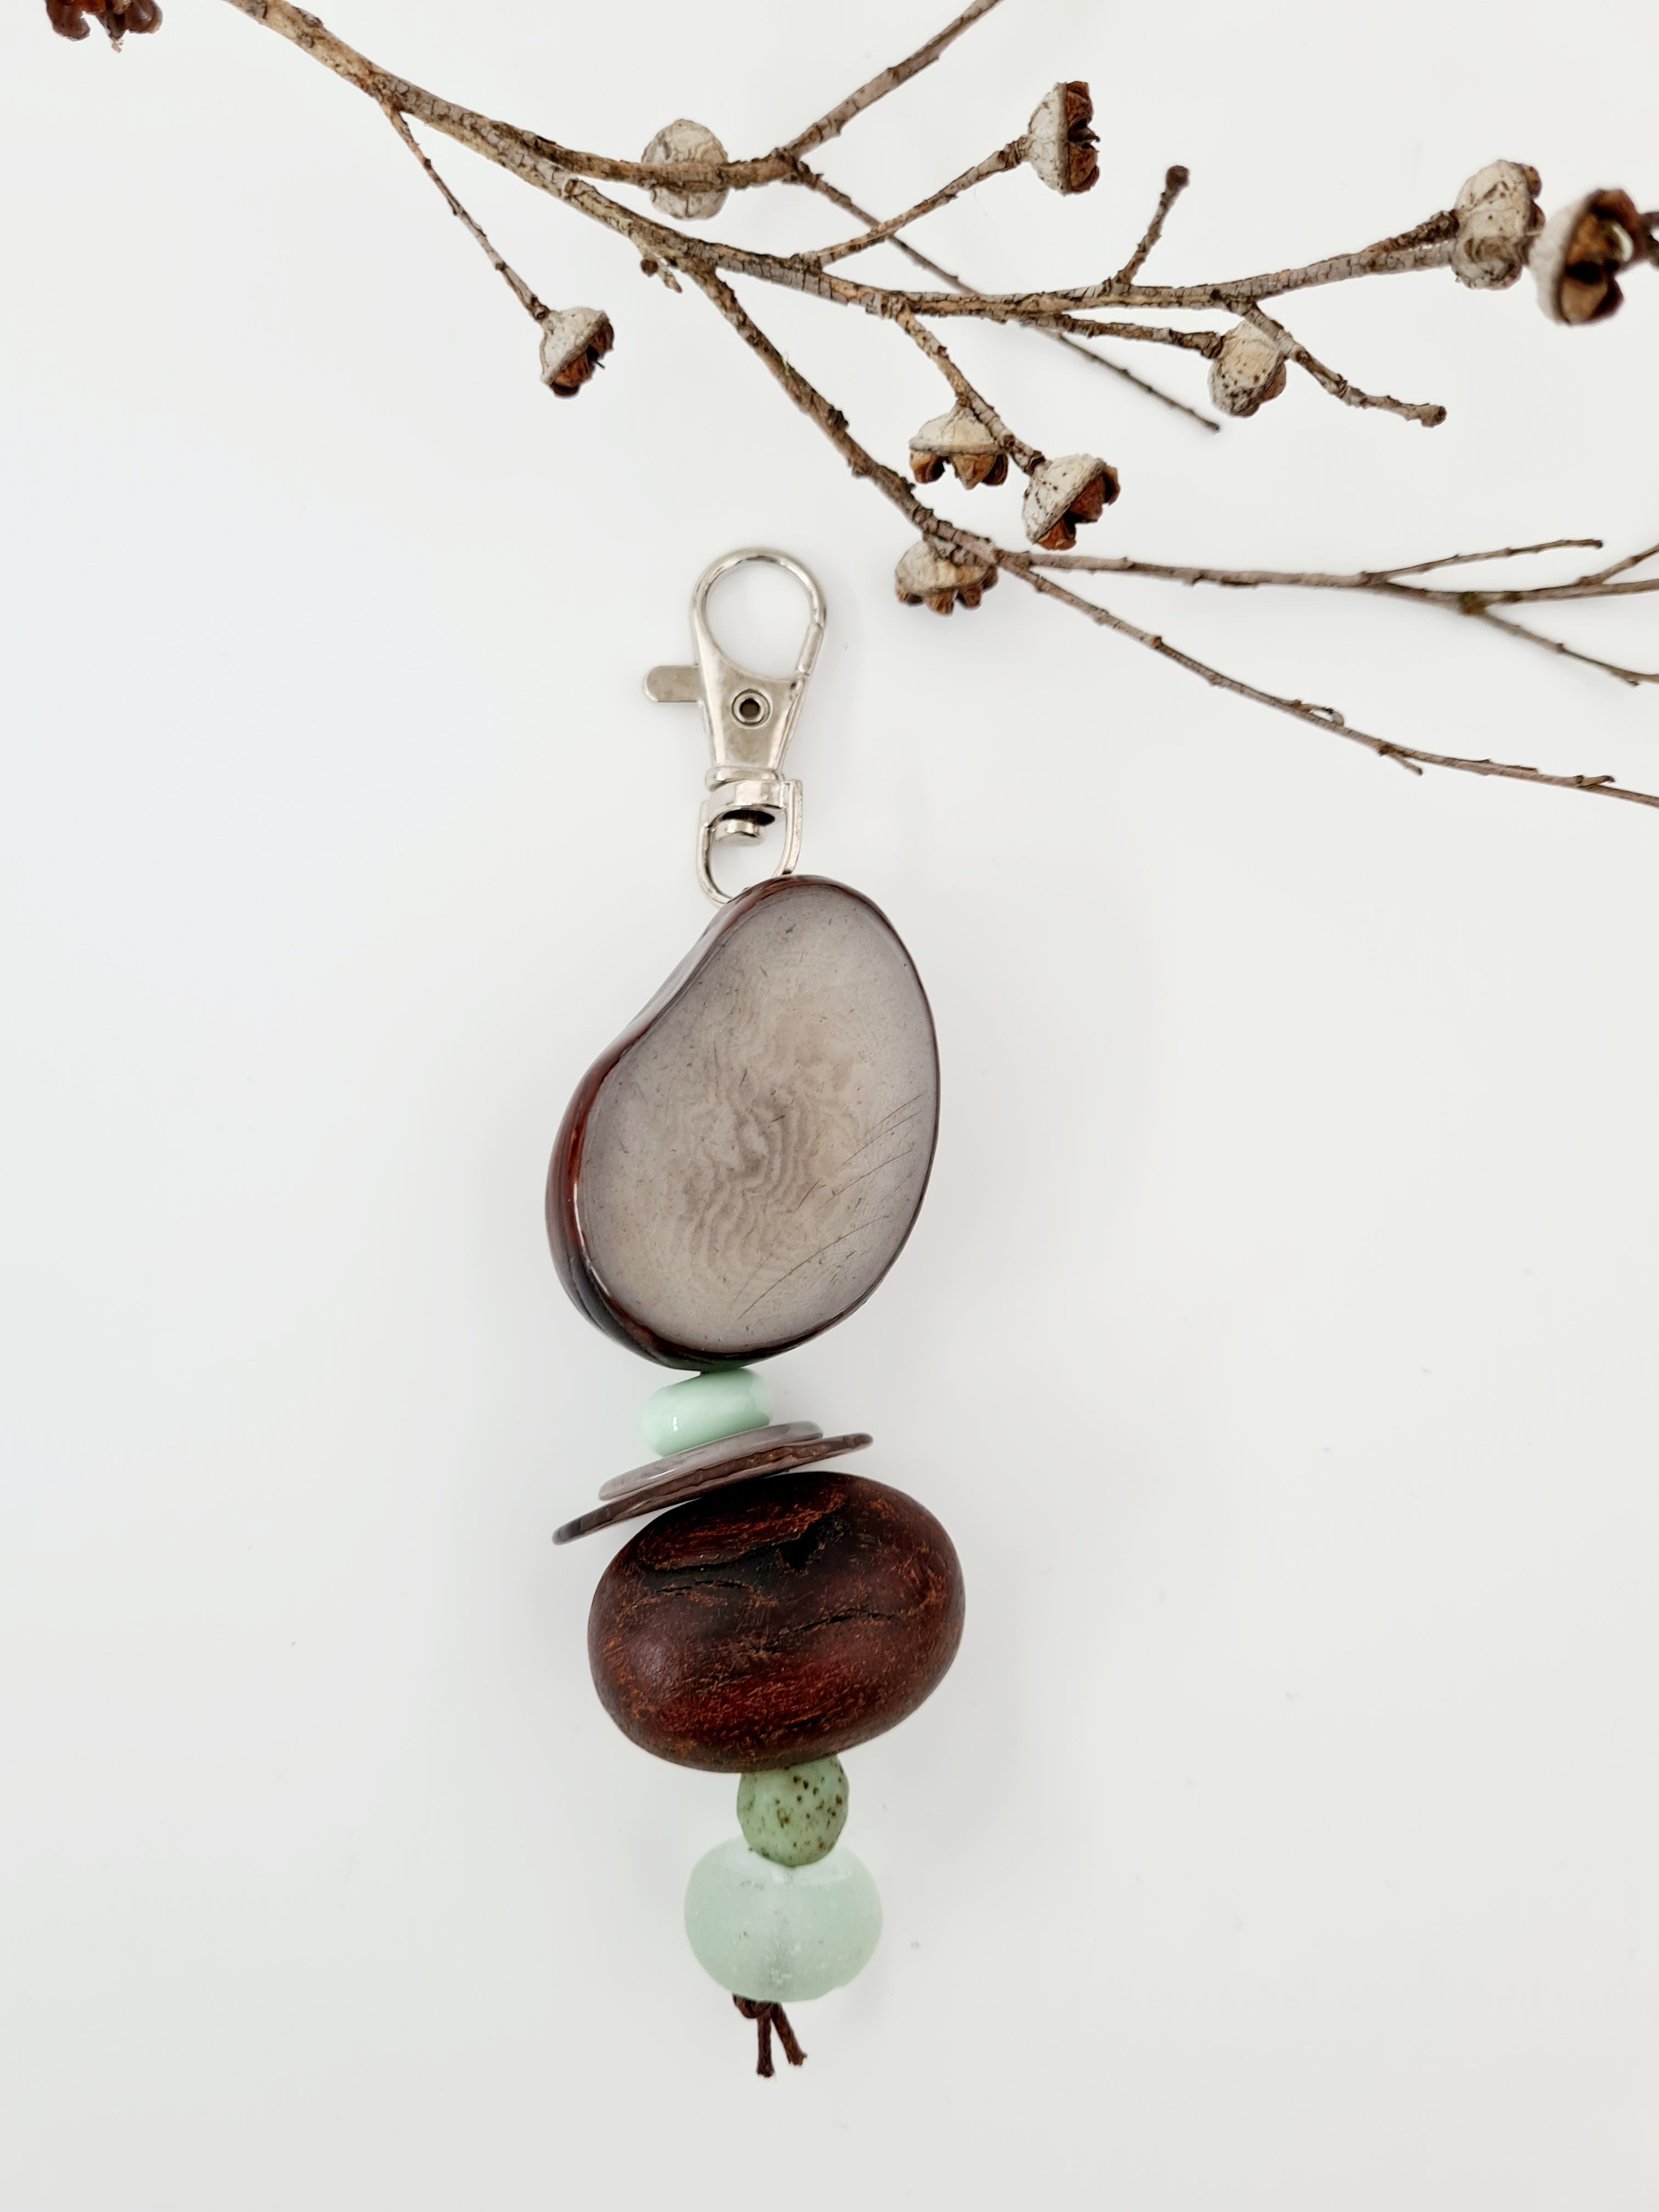 Eco Beads Key Ring key ring The Spotted Quoll Studio Sticks & Stones 